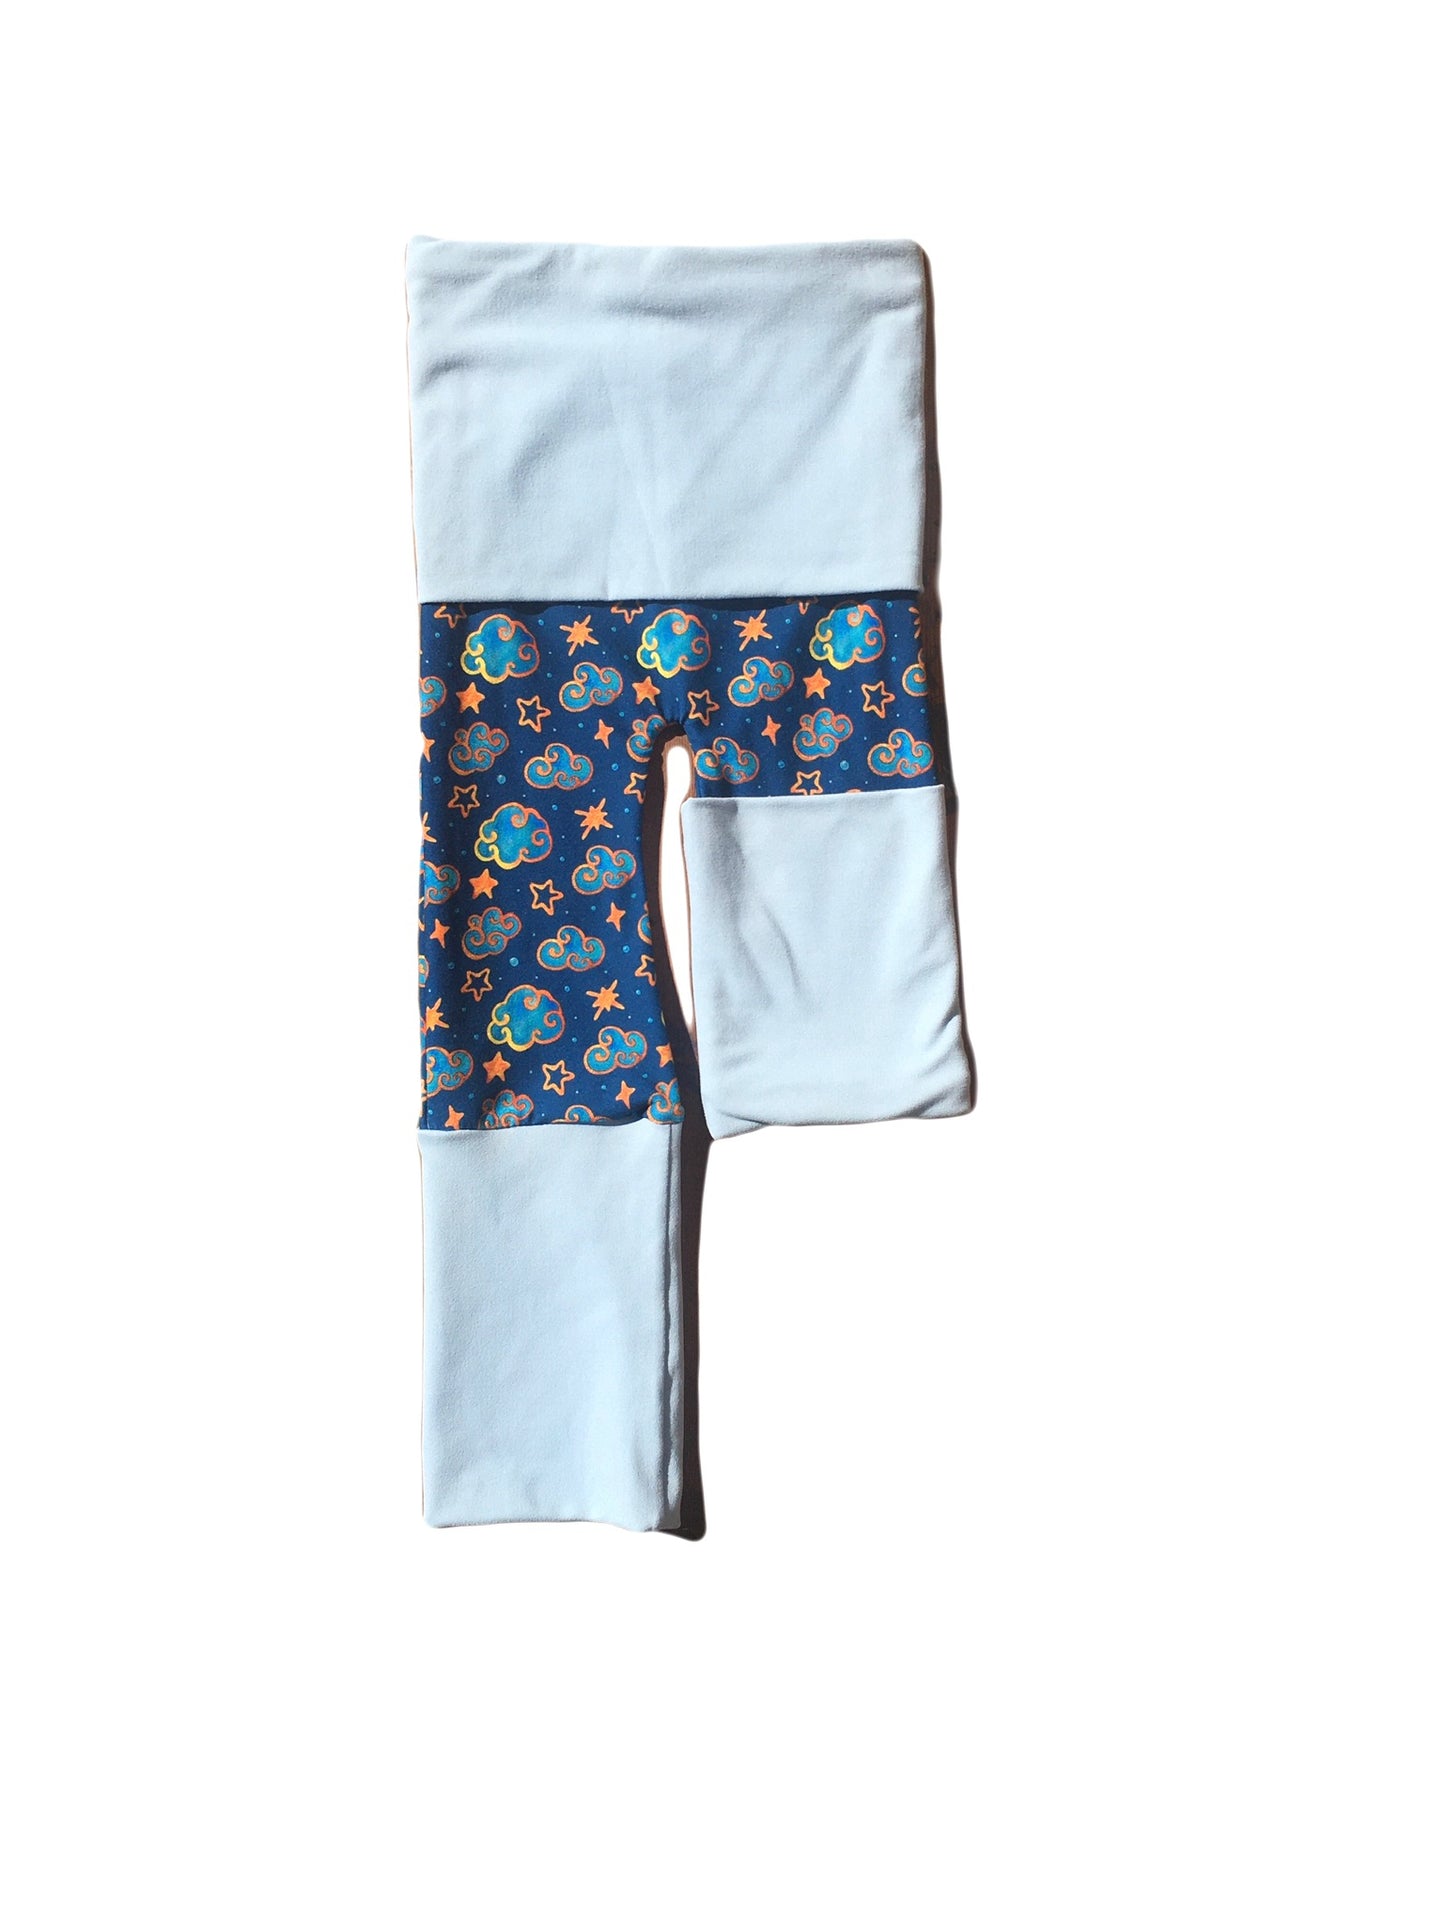 Adjustable Pants - Clouds with Light Blue